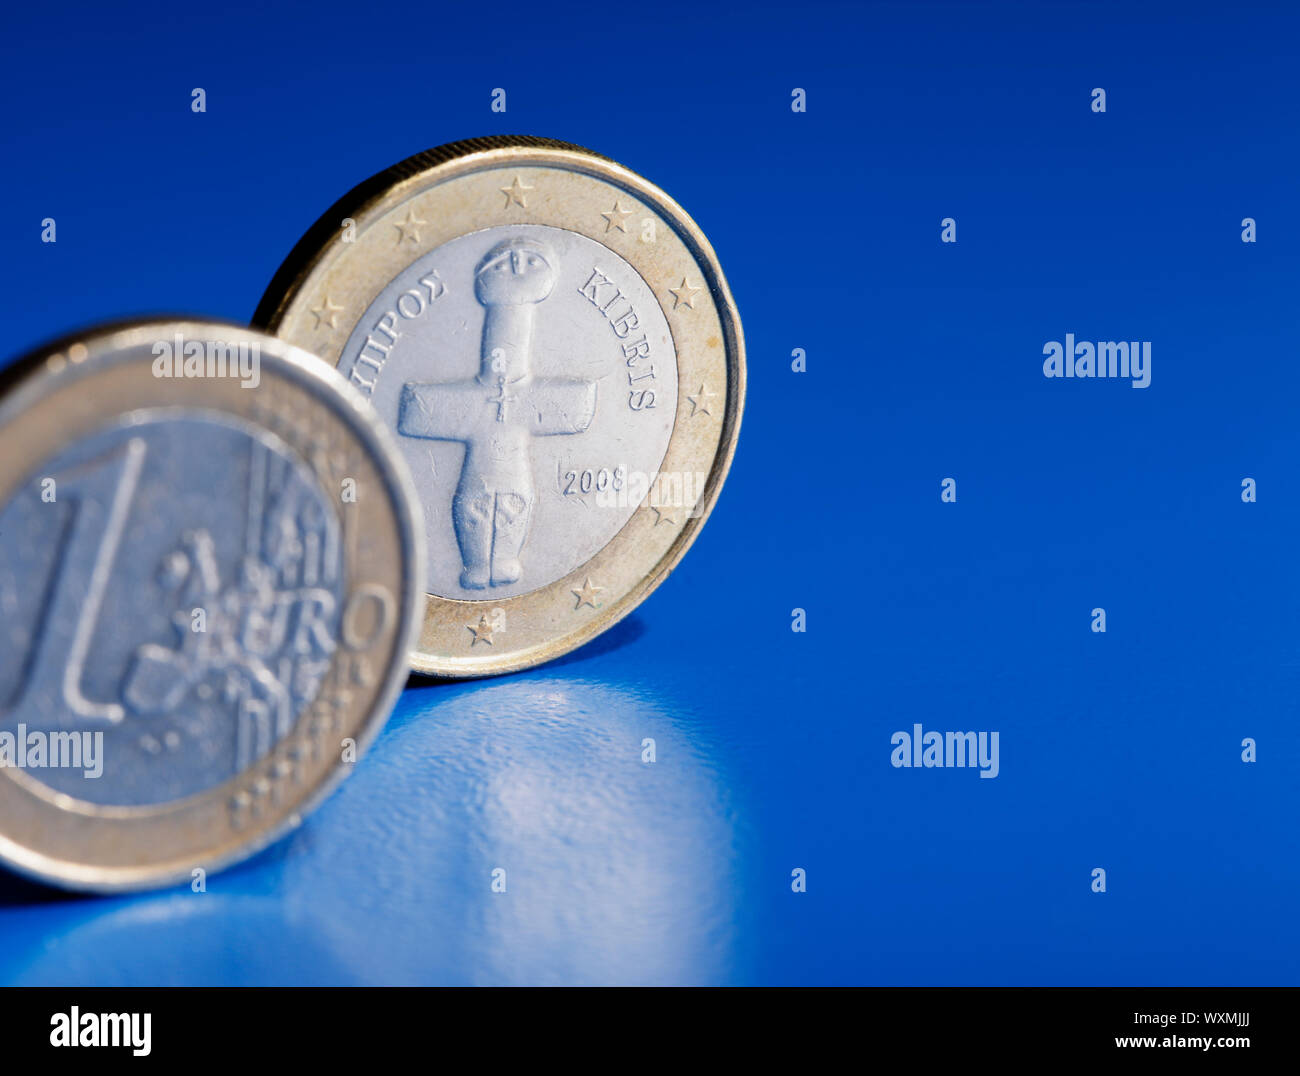 Euro coins from Cyprus on blue background. Stock Photo